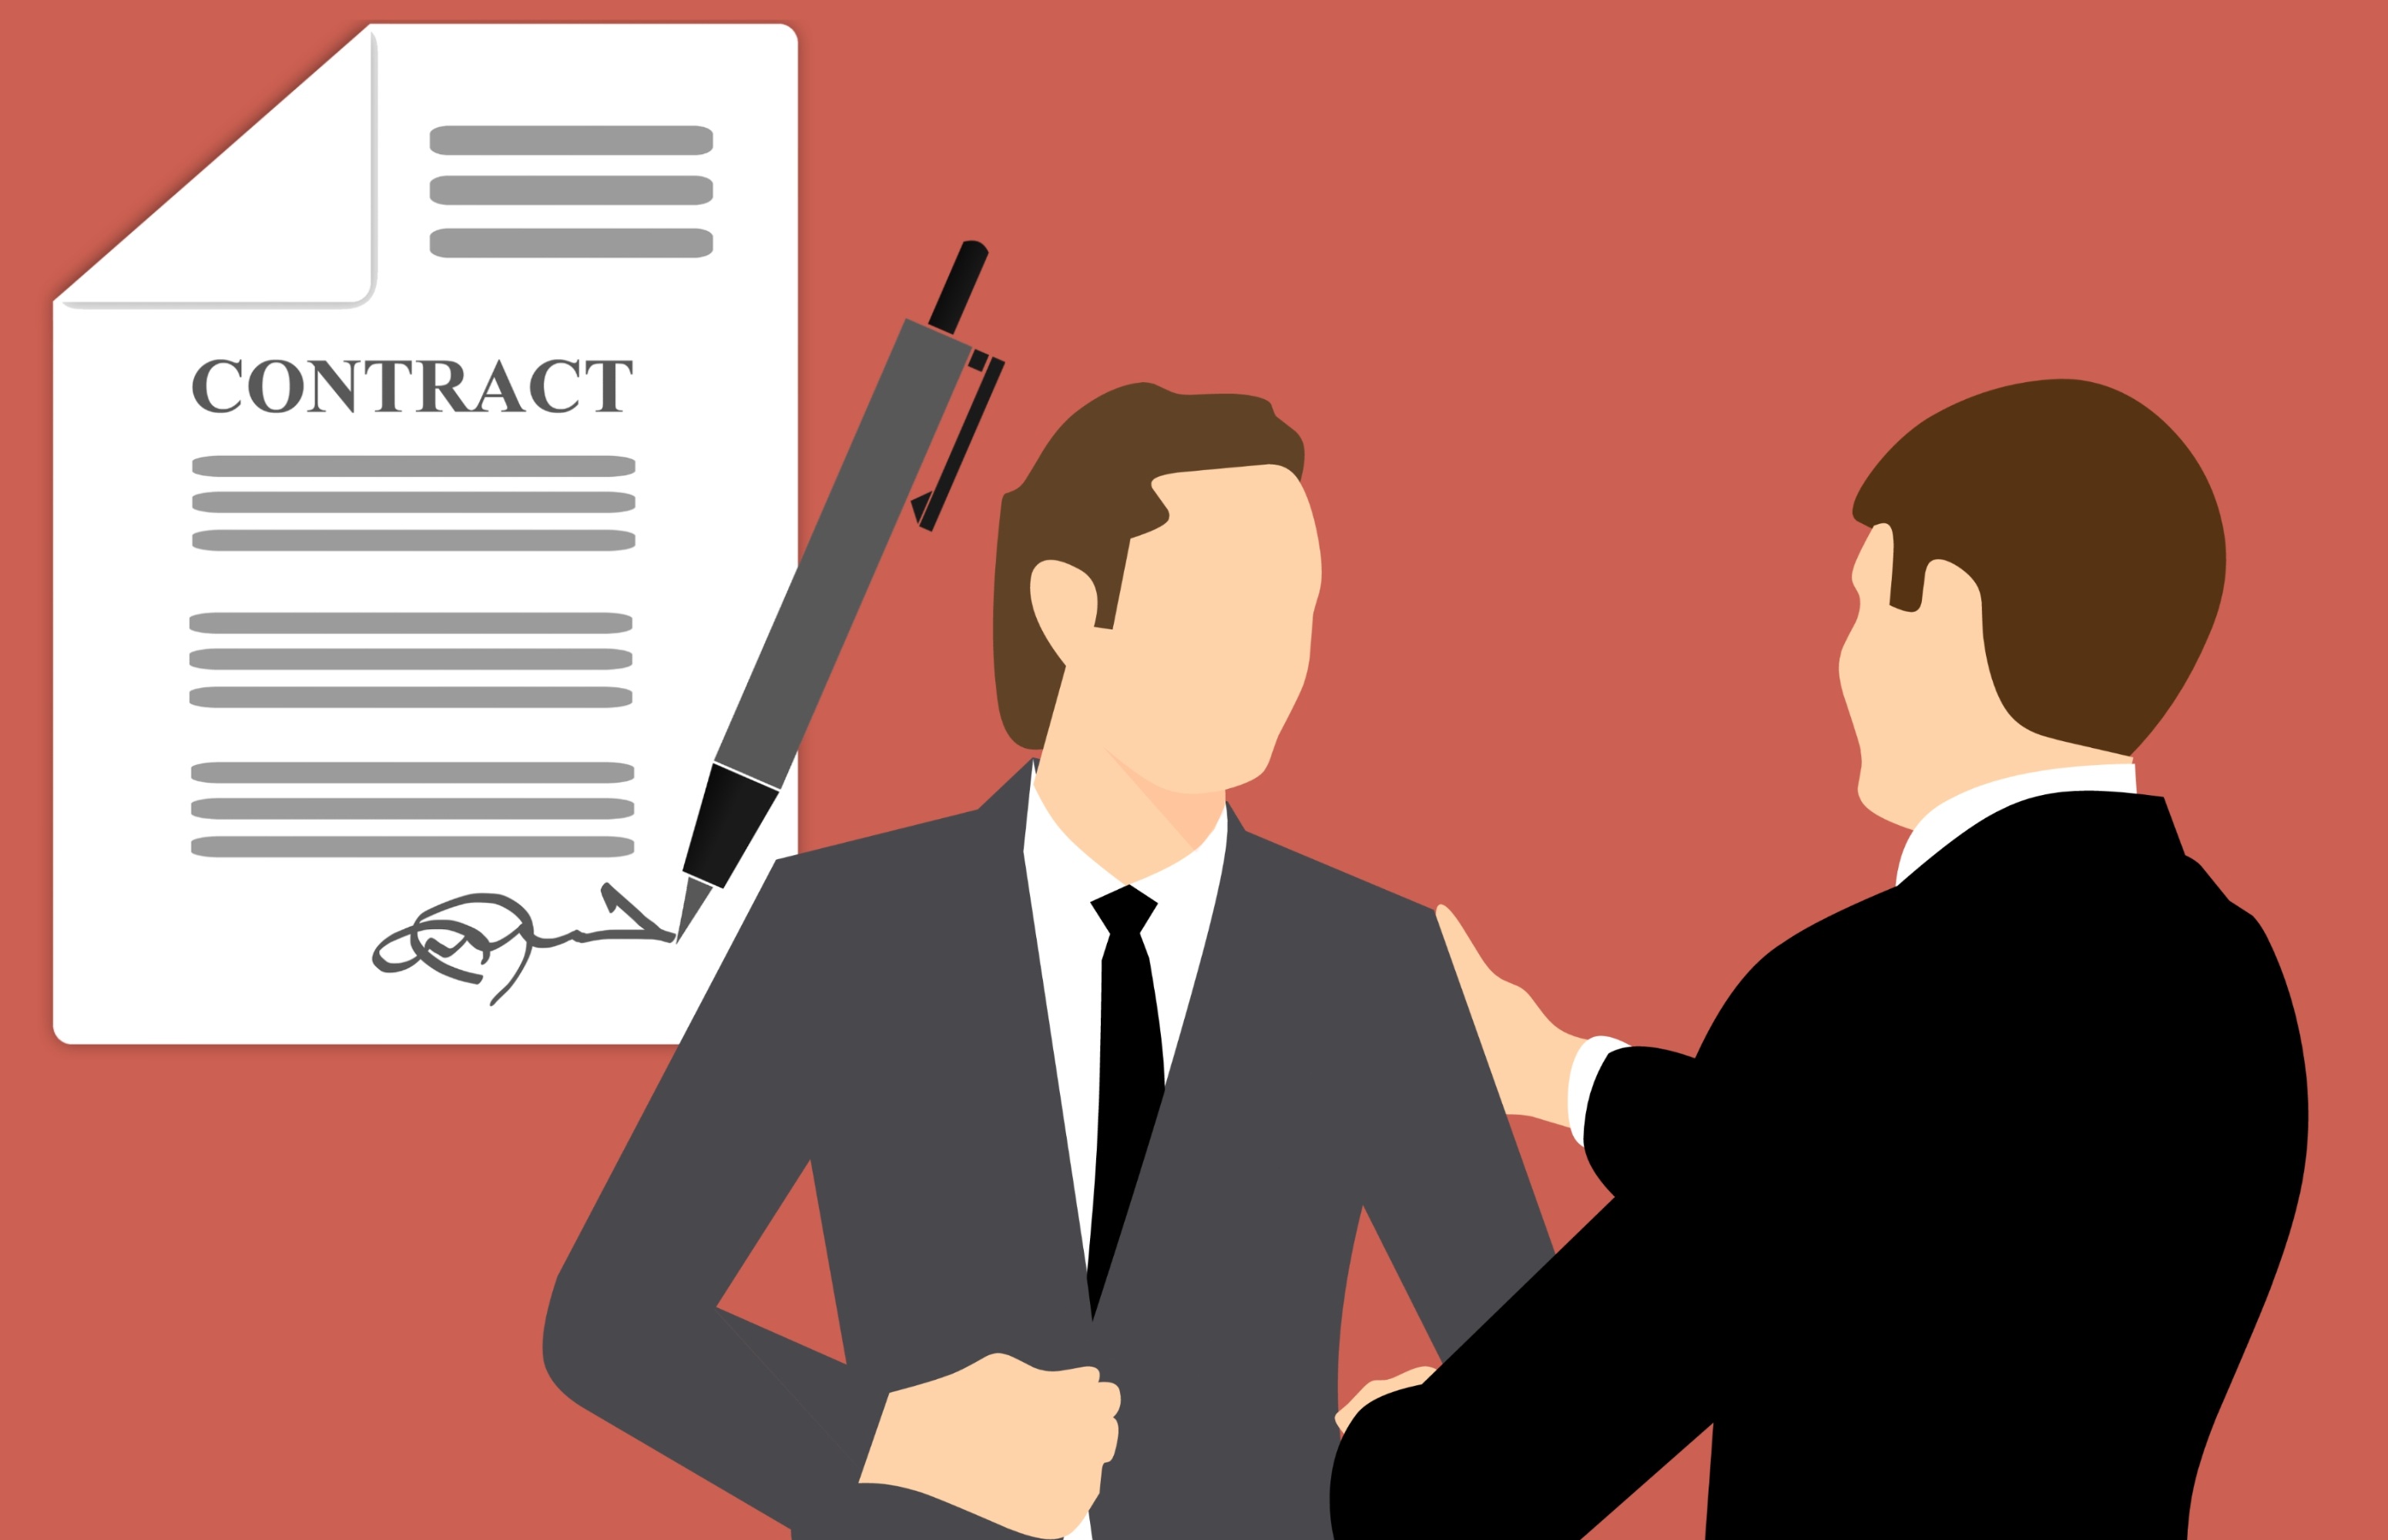 Business contract agreement drawing free image download